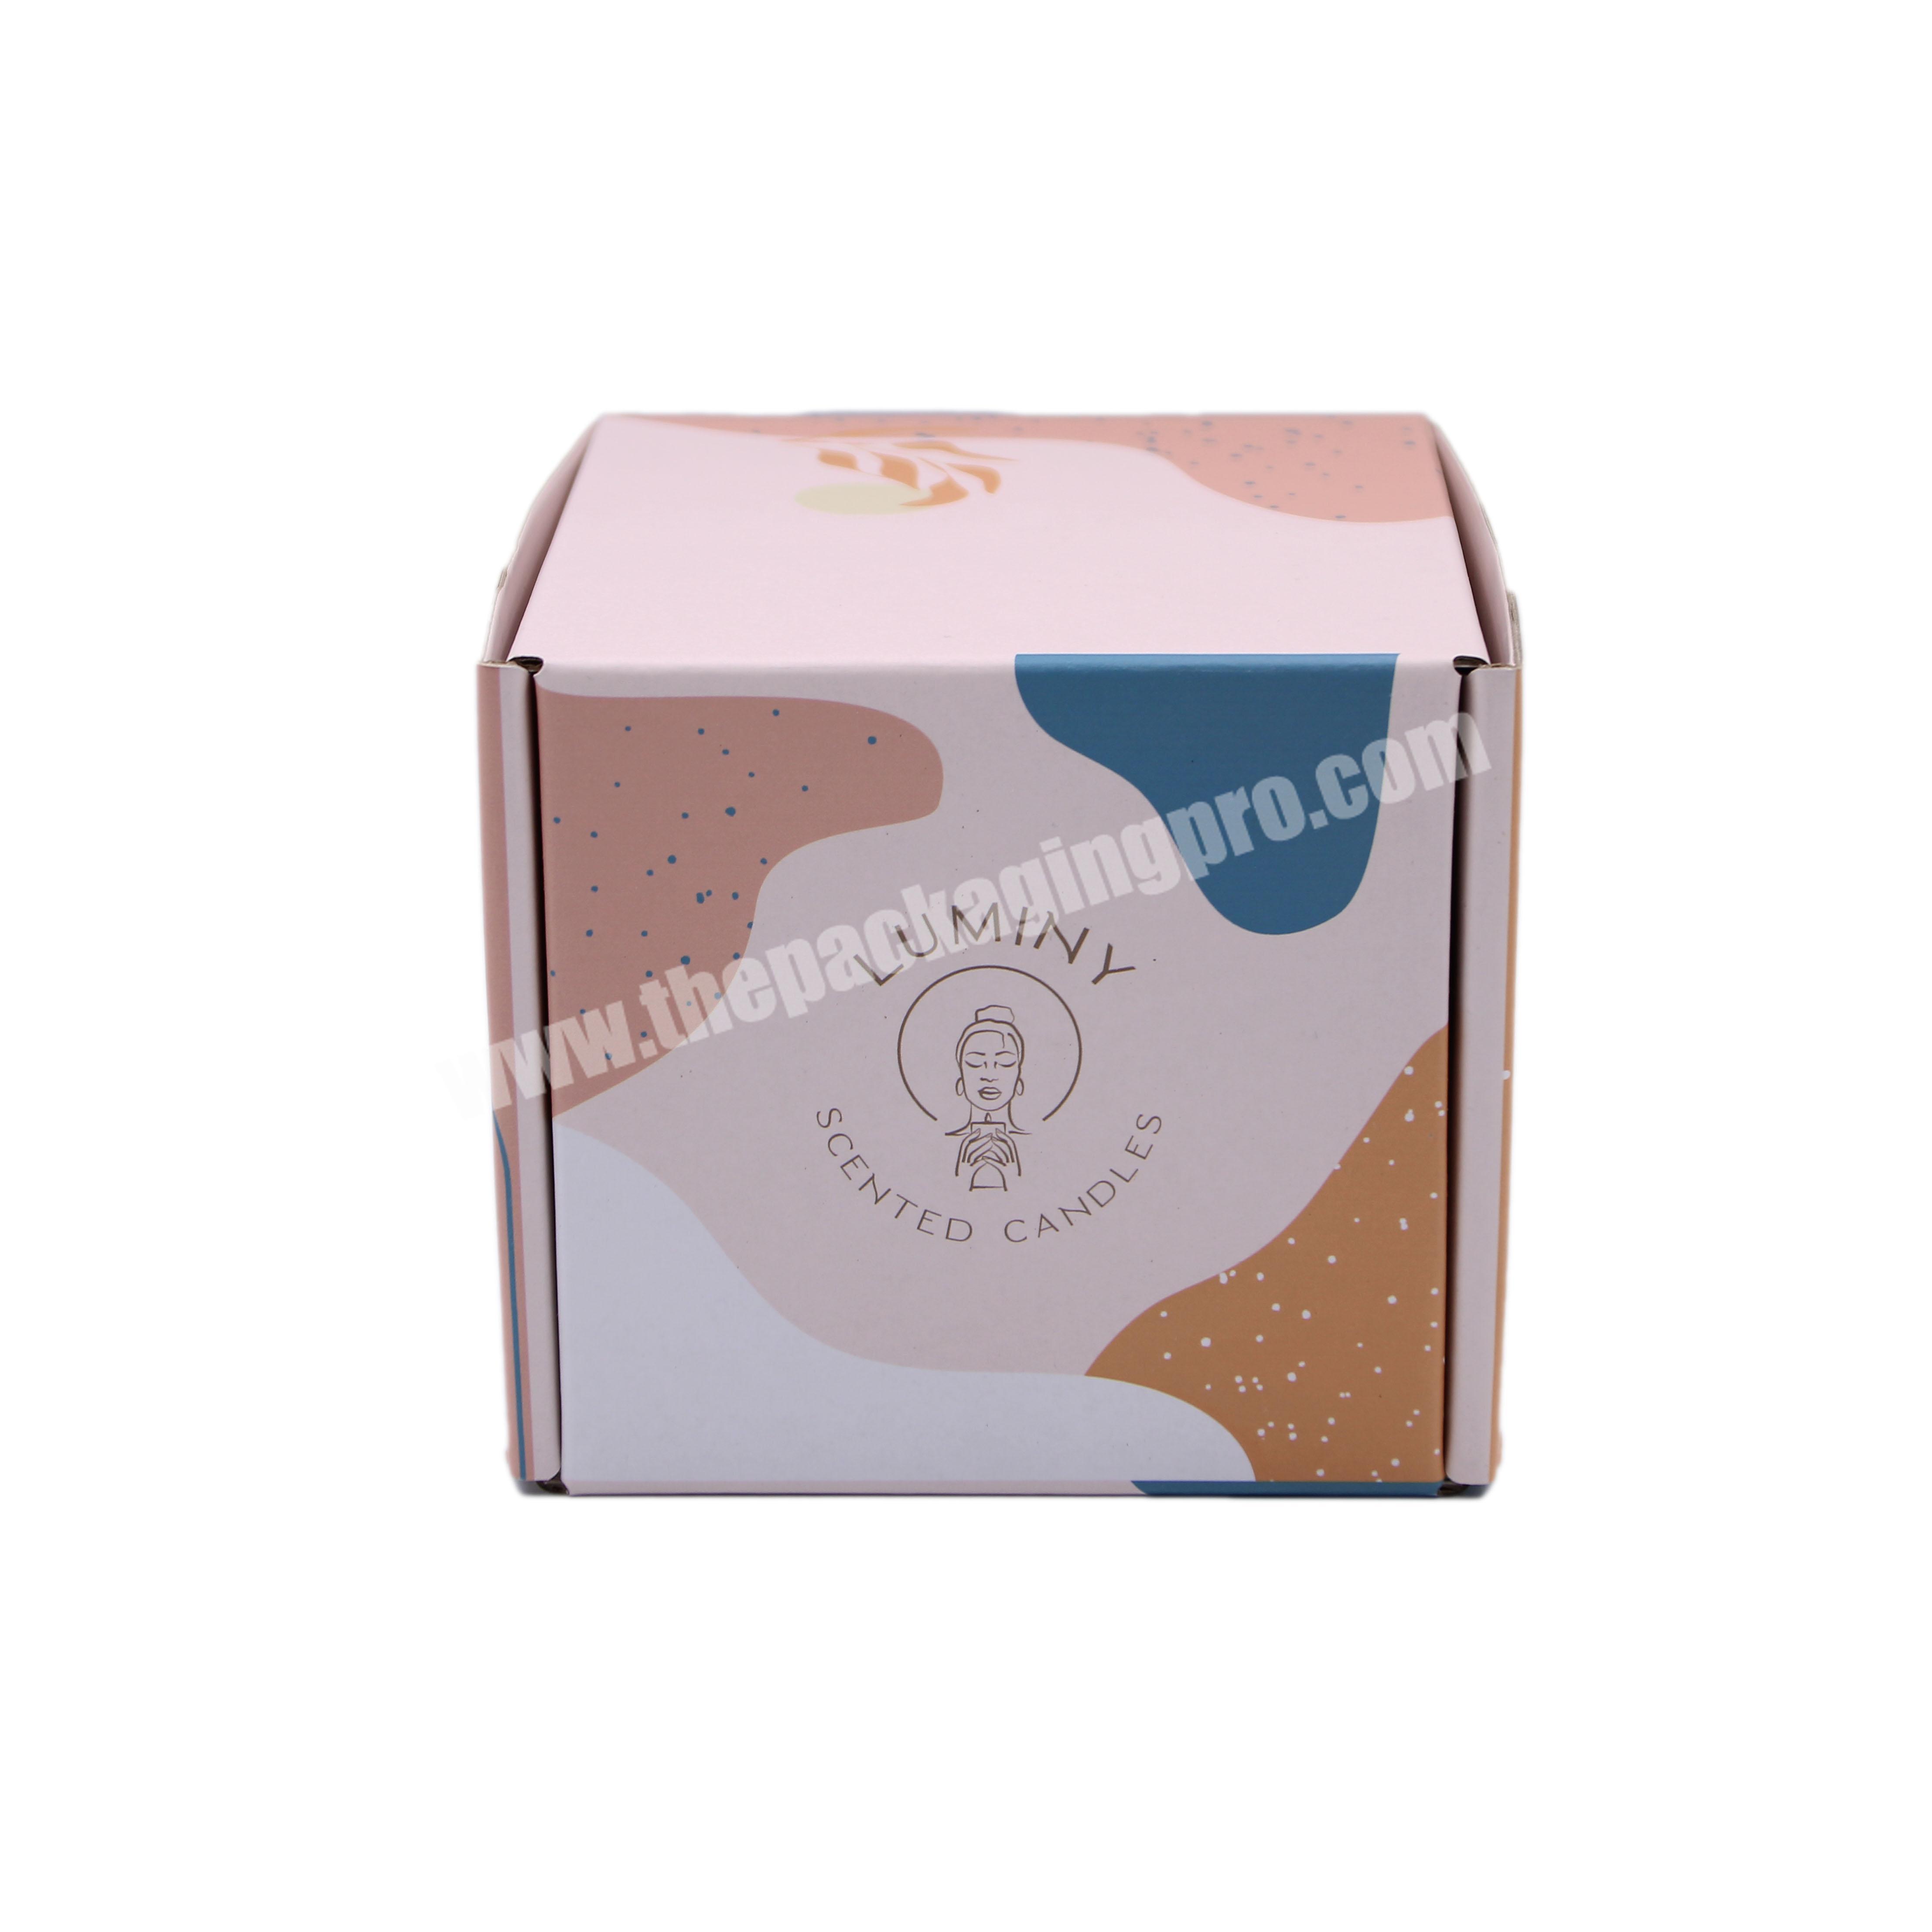 Mailer Box Manufacture Customized Colored Mailer Boxes With Custom Logo Printed, Durable Apparel Packaging Boxes For  Shipping